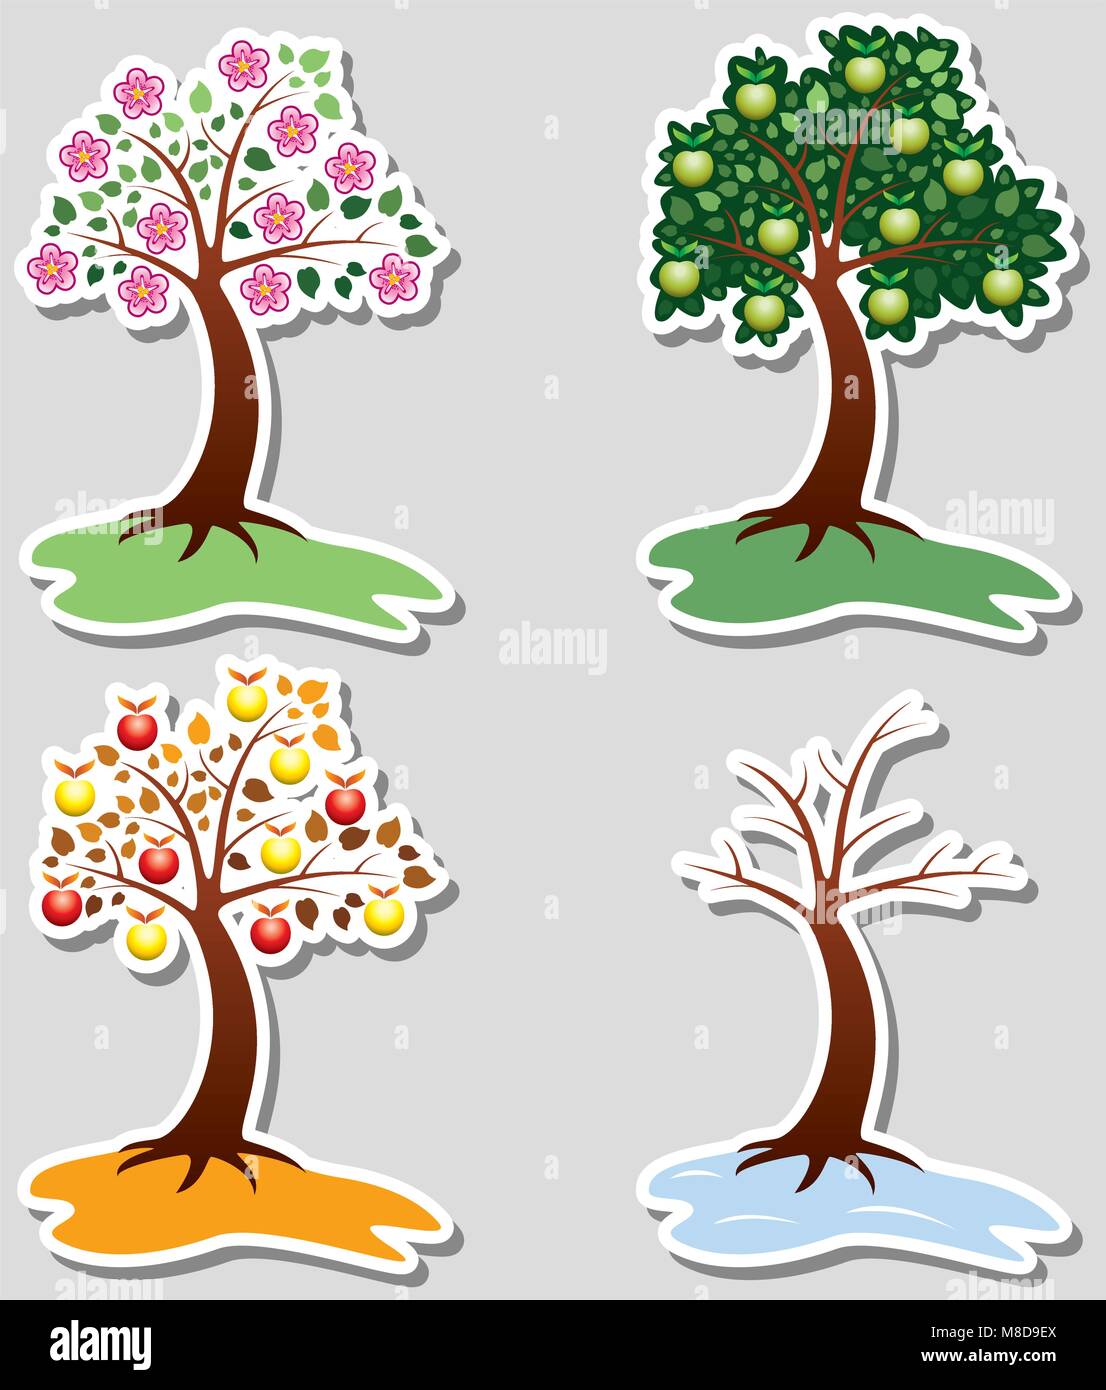 vector set of apple trees in four seasons Stock Vector